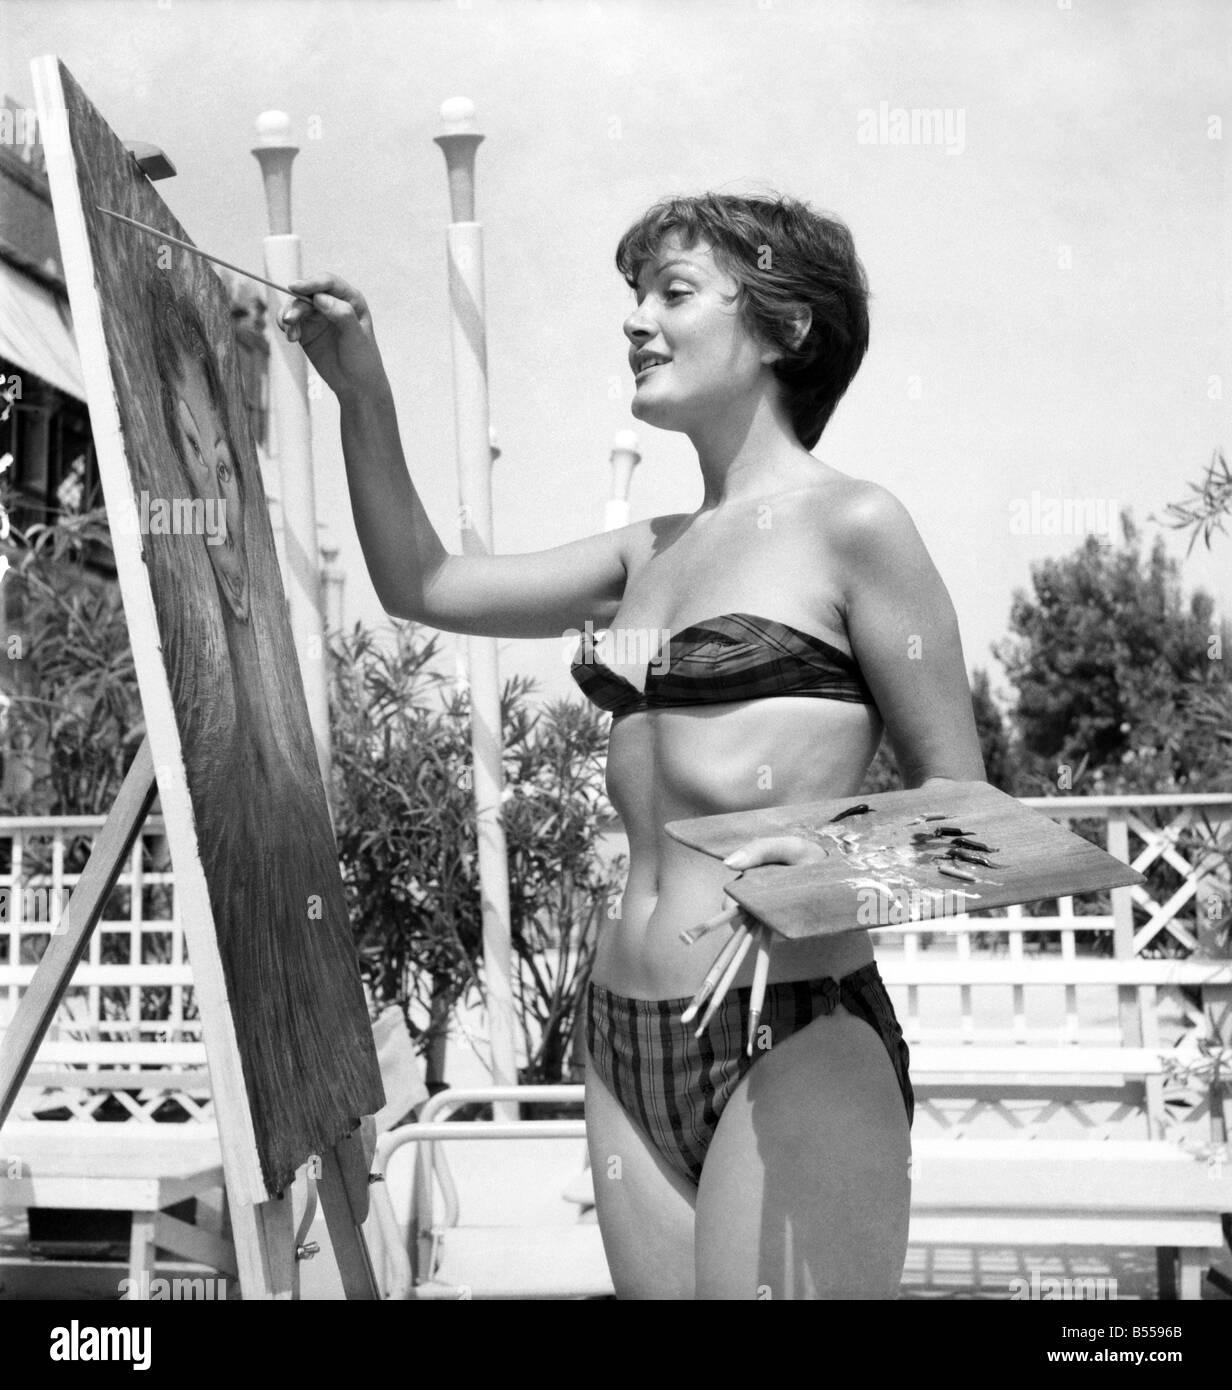 Venice Film Festival 1953. Novella Pariginia who has come to the festival to paint the visitors. She believes in comfort and wears a bikini when painting. She is seen here paint us actress Lya Haby. August 1953 D5369-021 Stock Photo